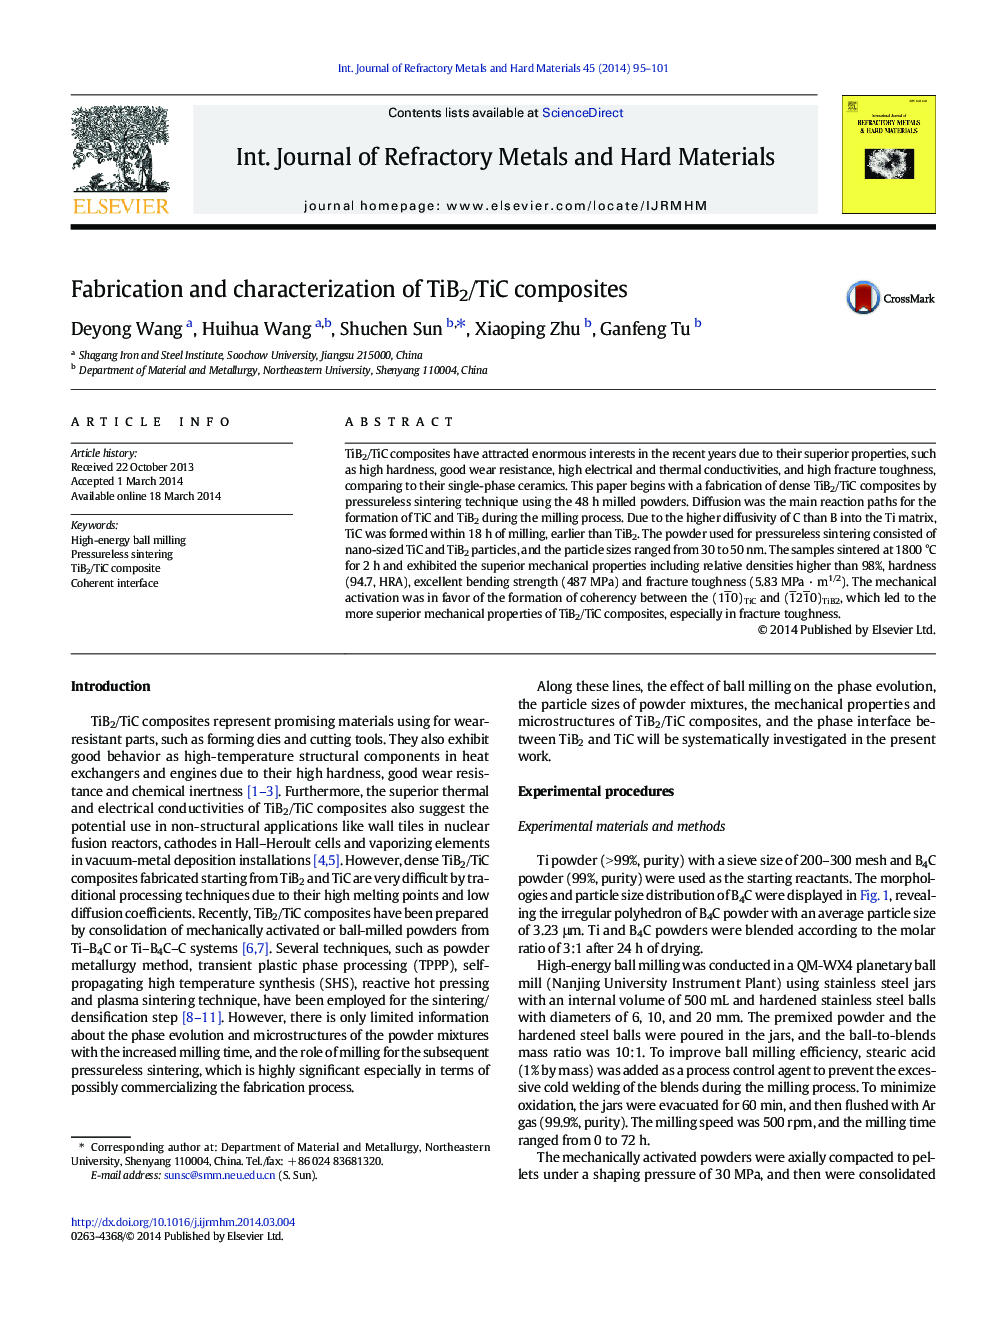 Fabrication and characterization of TiB2/TiC composites